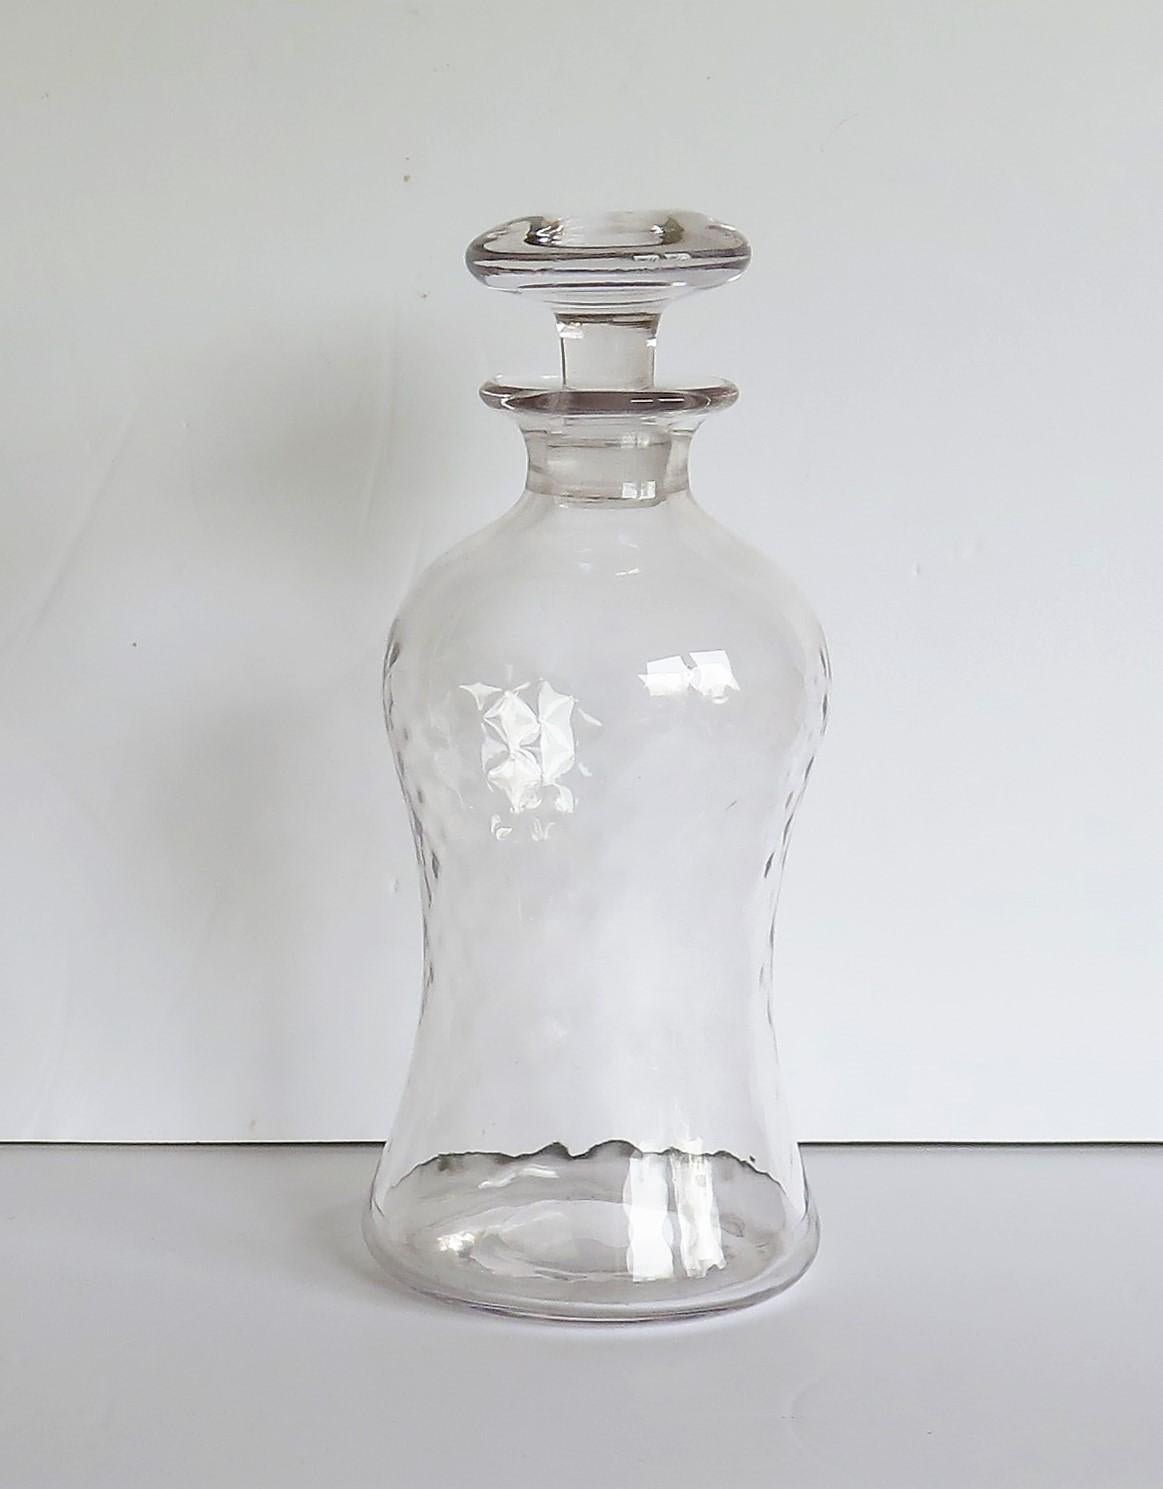 glass stopper of a decanter